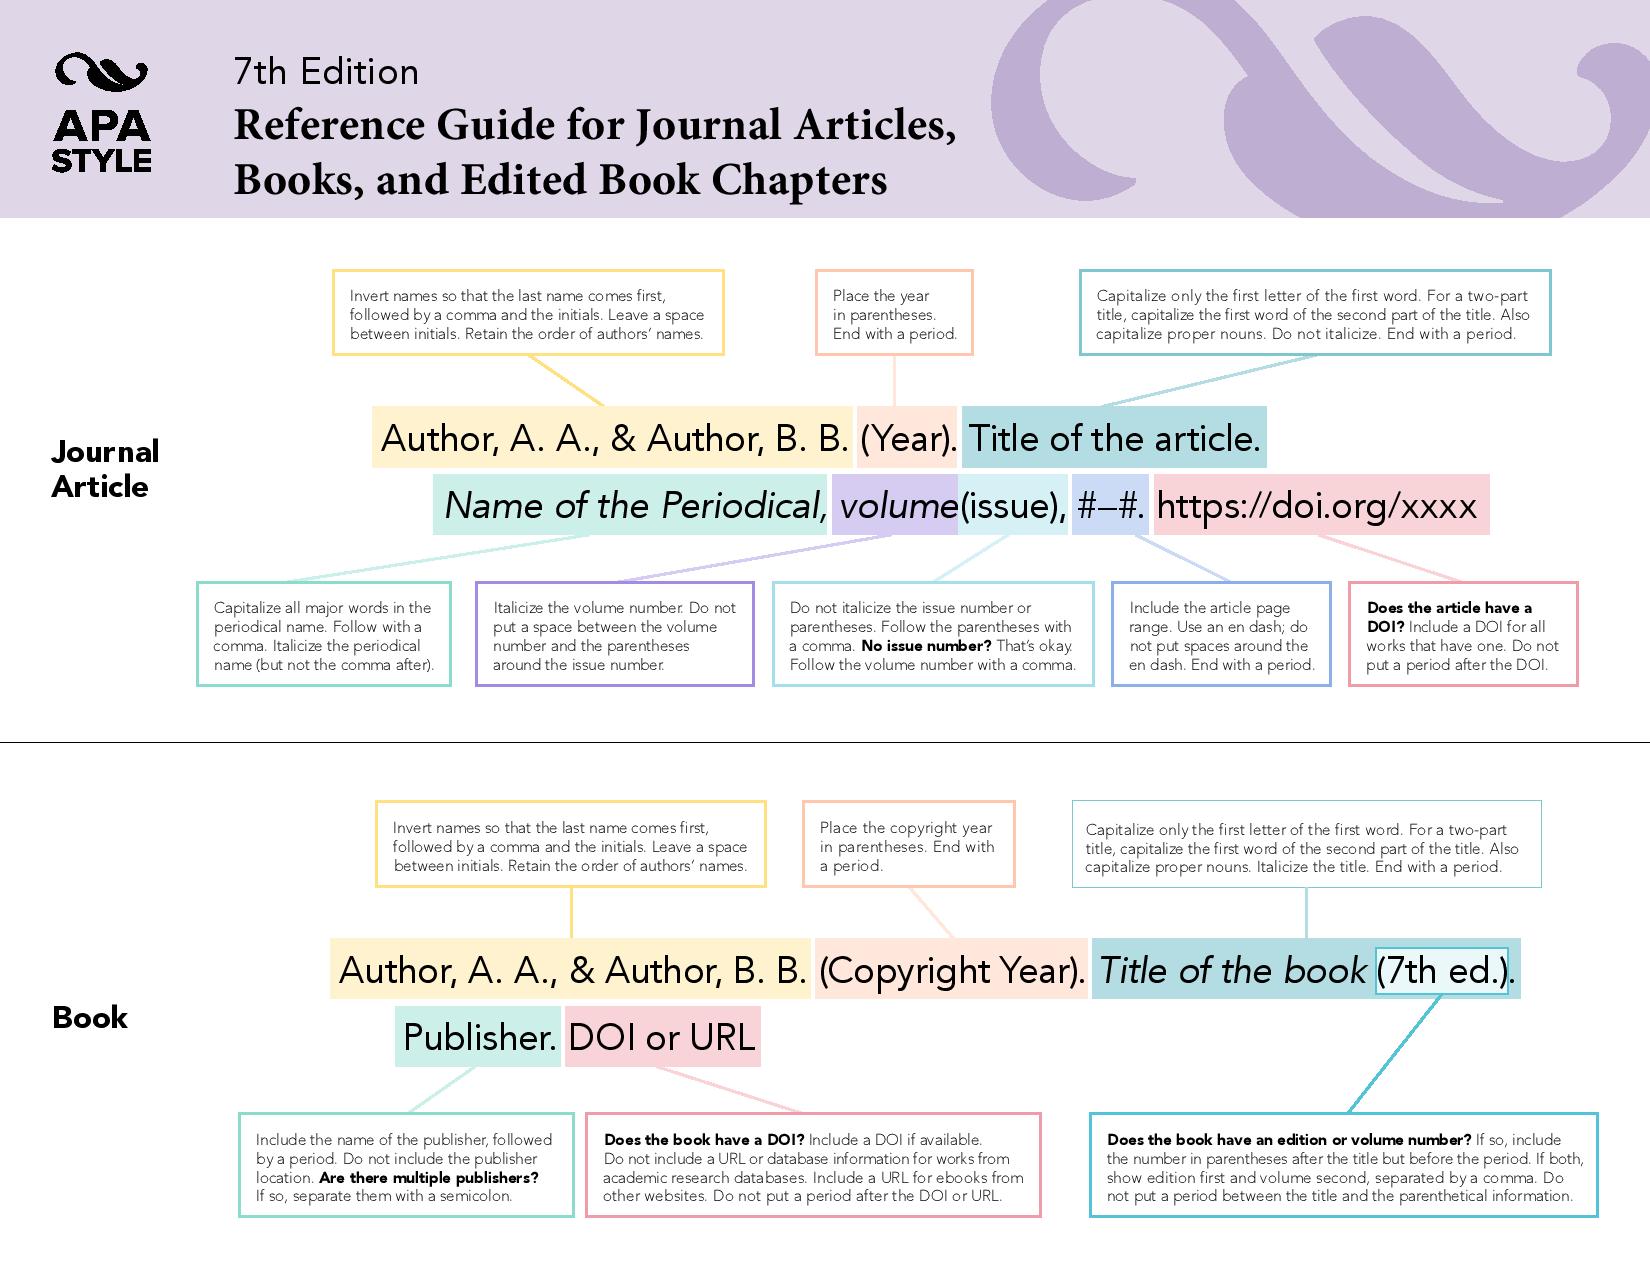 APA 7th edition reference guide for journal articles, books and edited book chapters